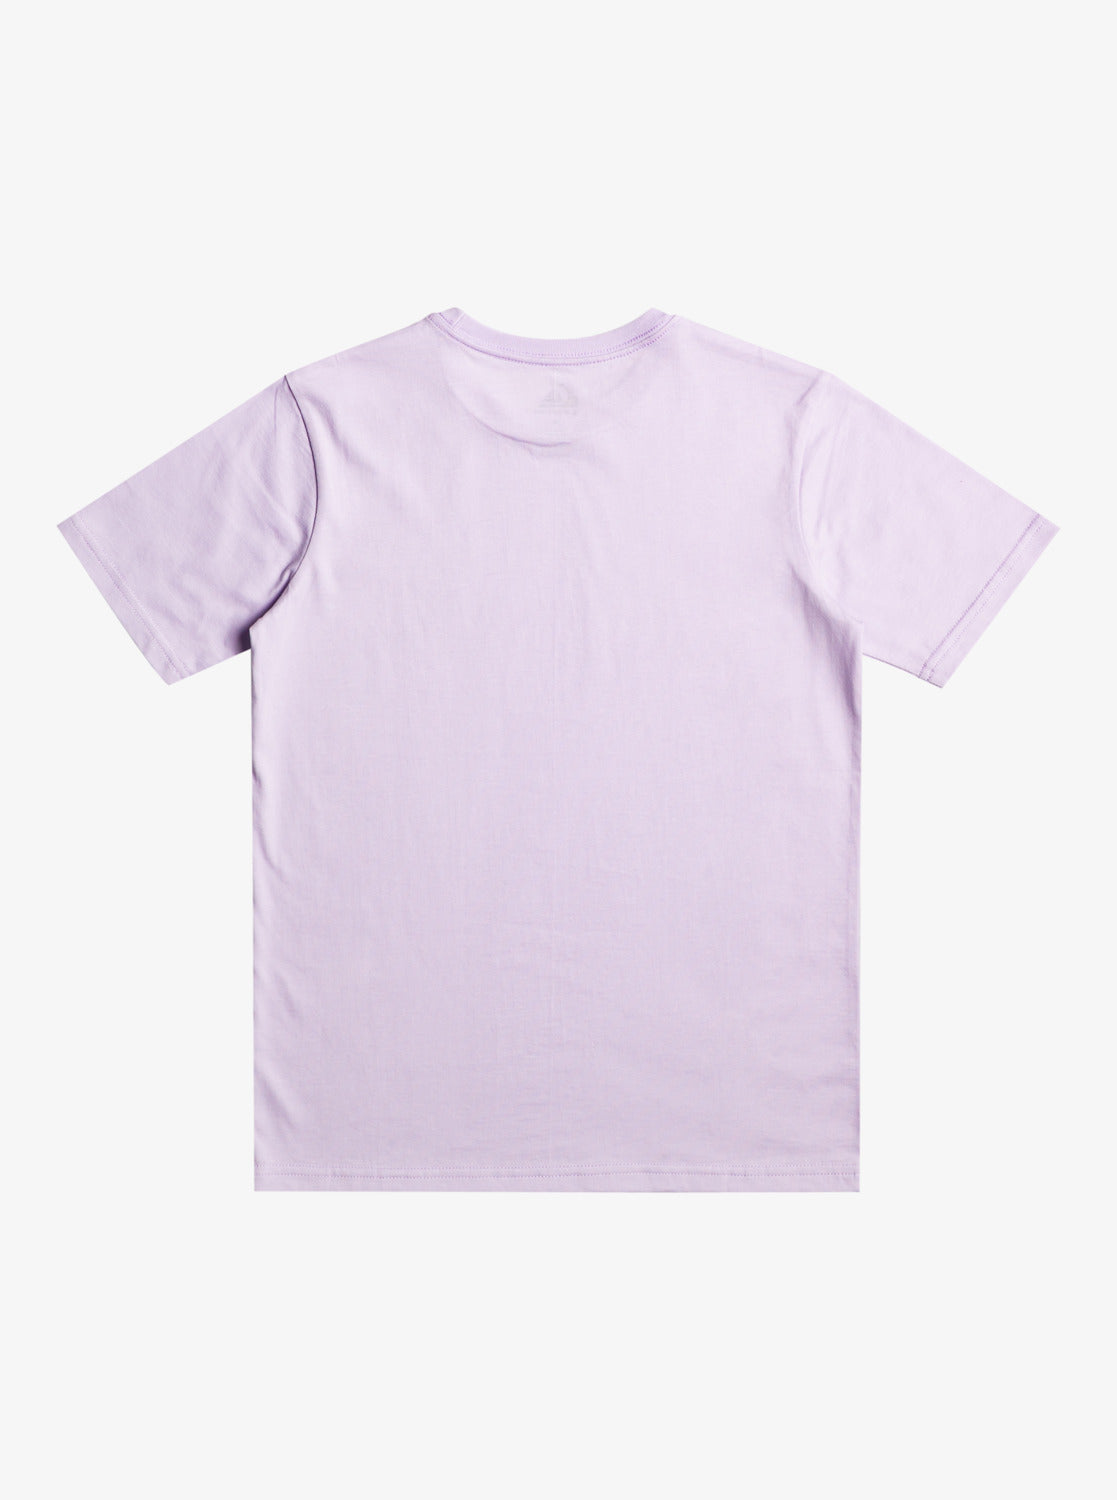 Quiksilver Signature Move T-Shirt in Pastel Lilac